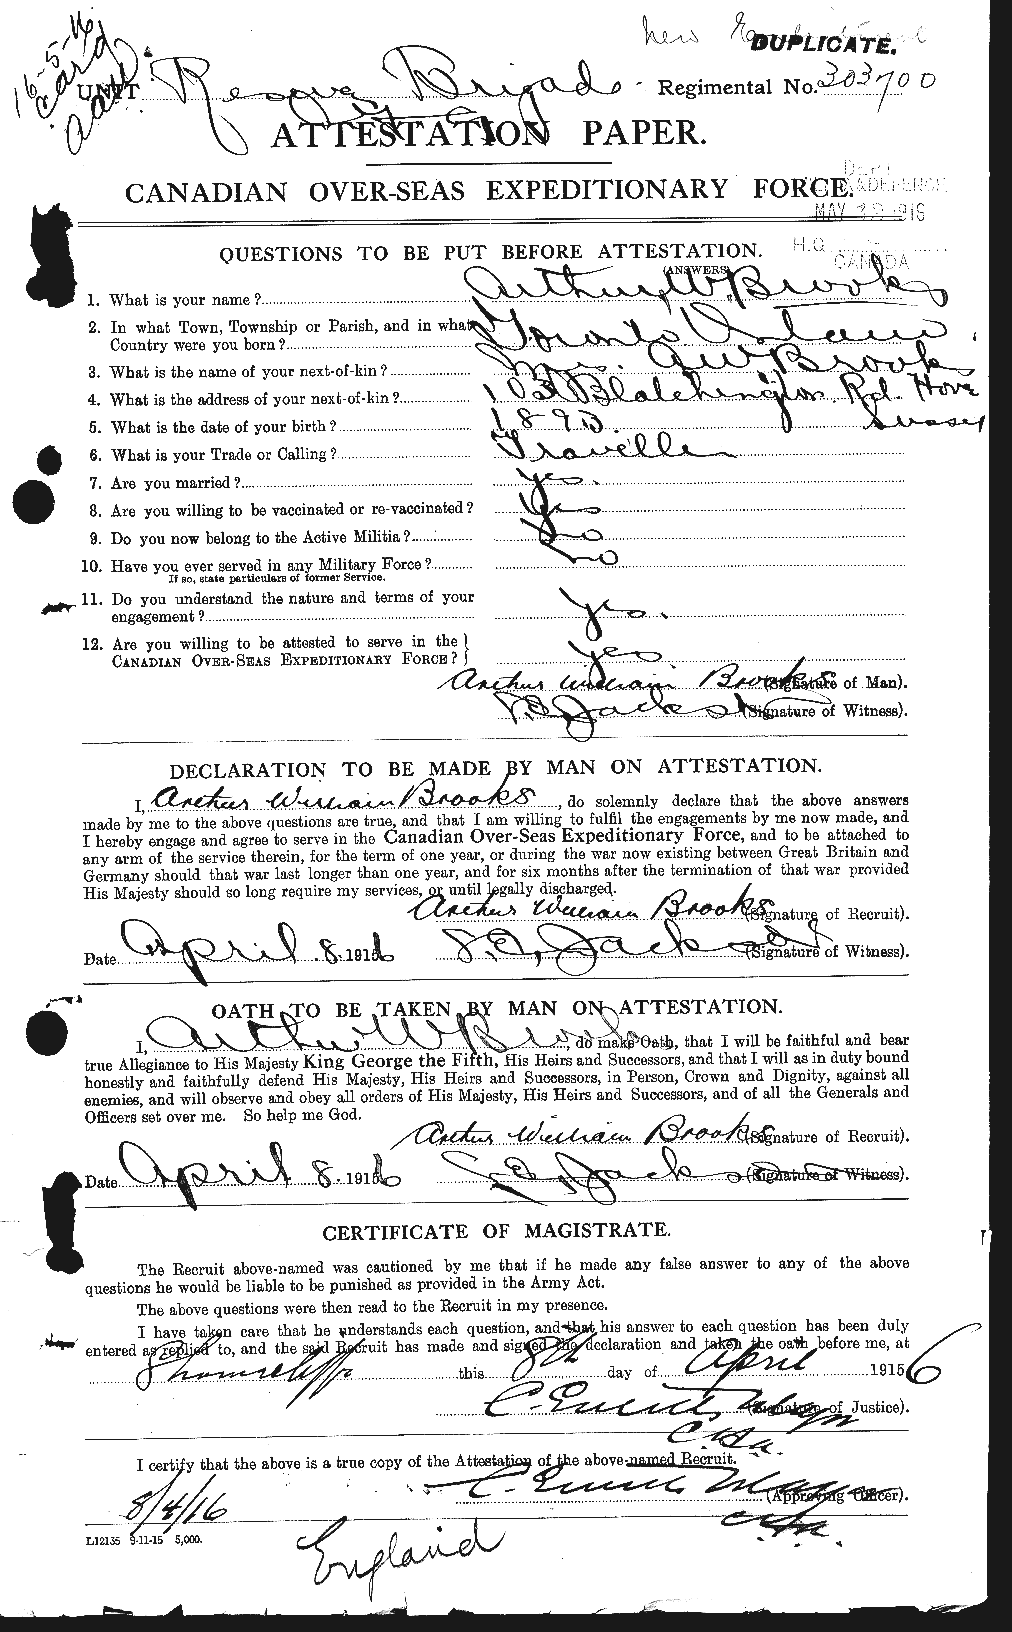 Personnel Records of the First World War - CEF 261492a